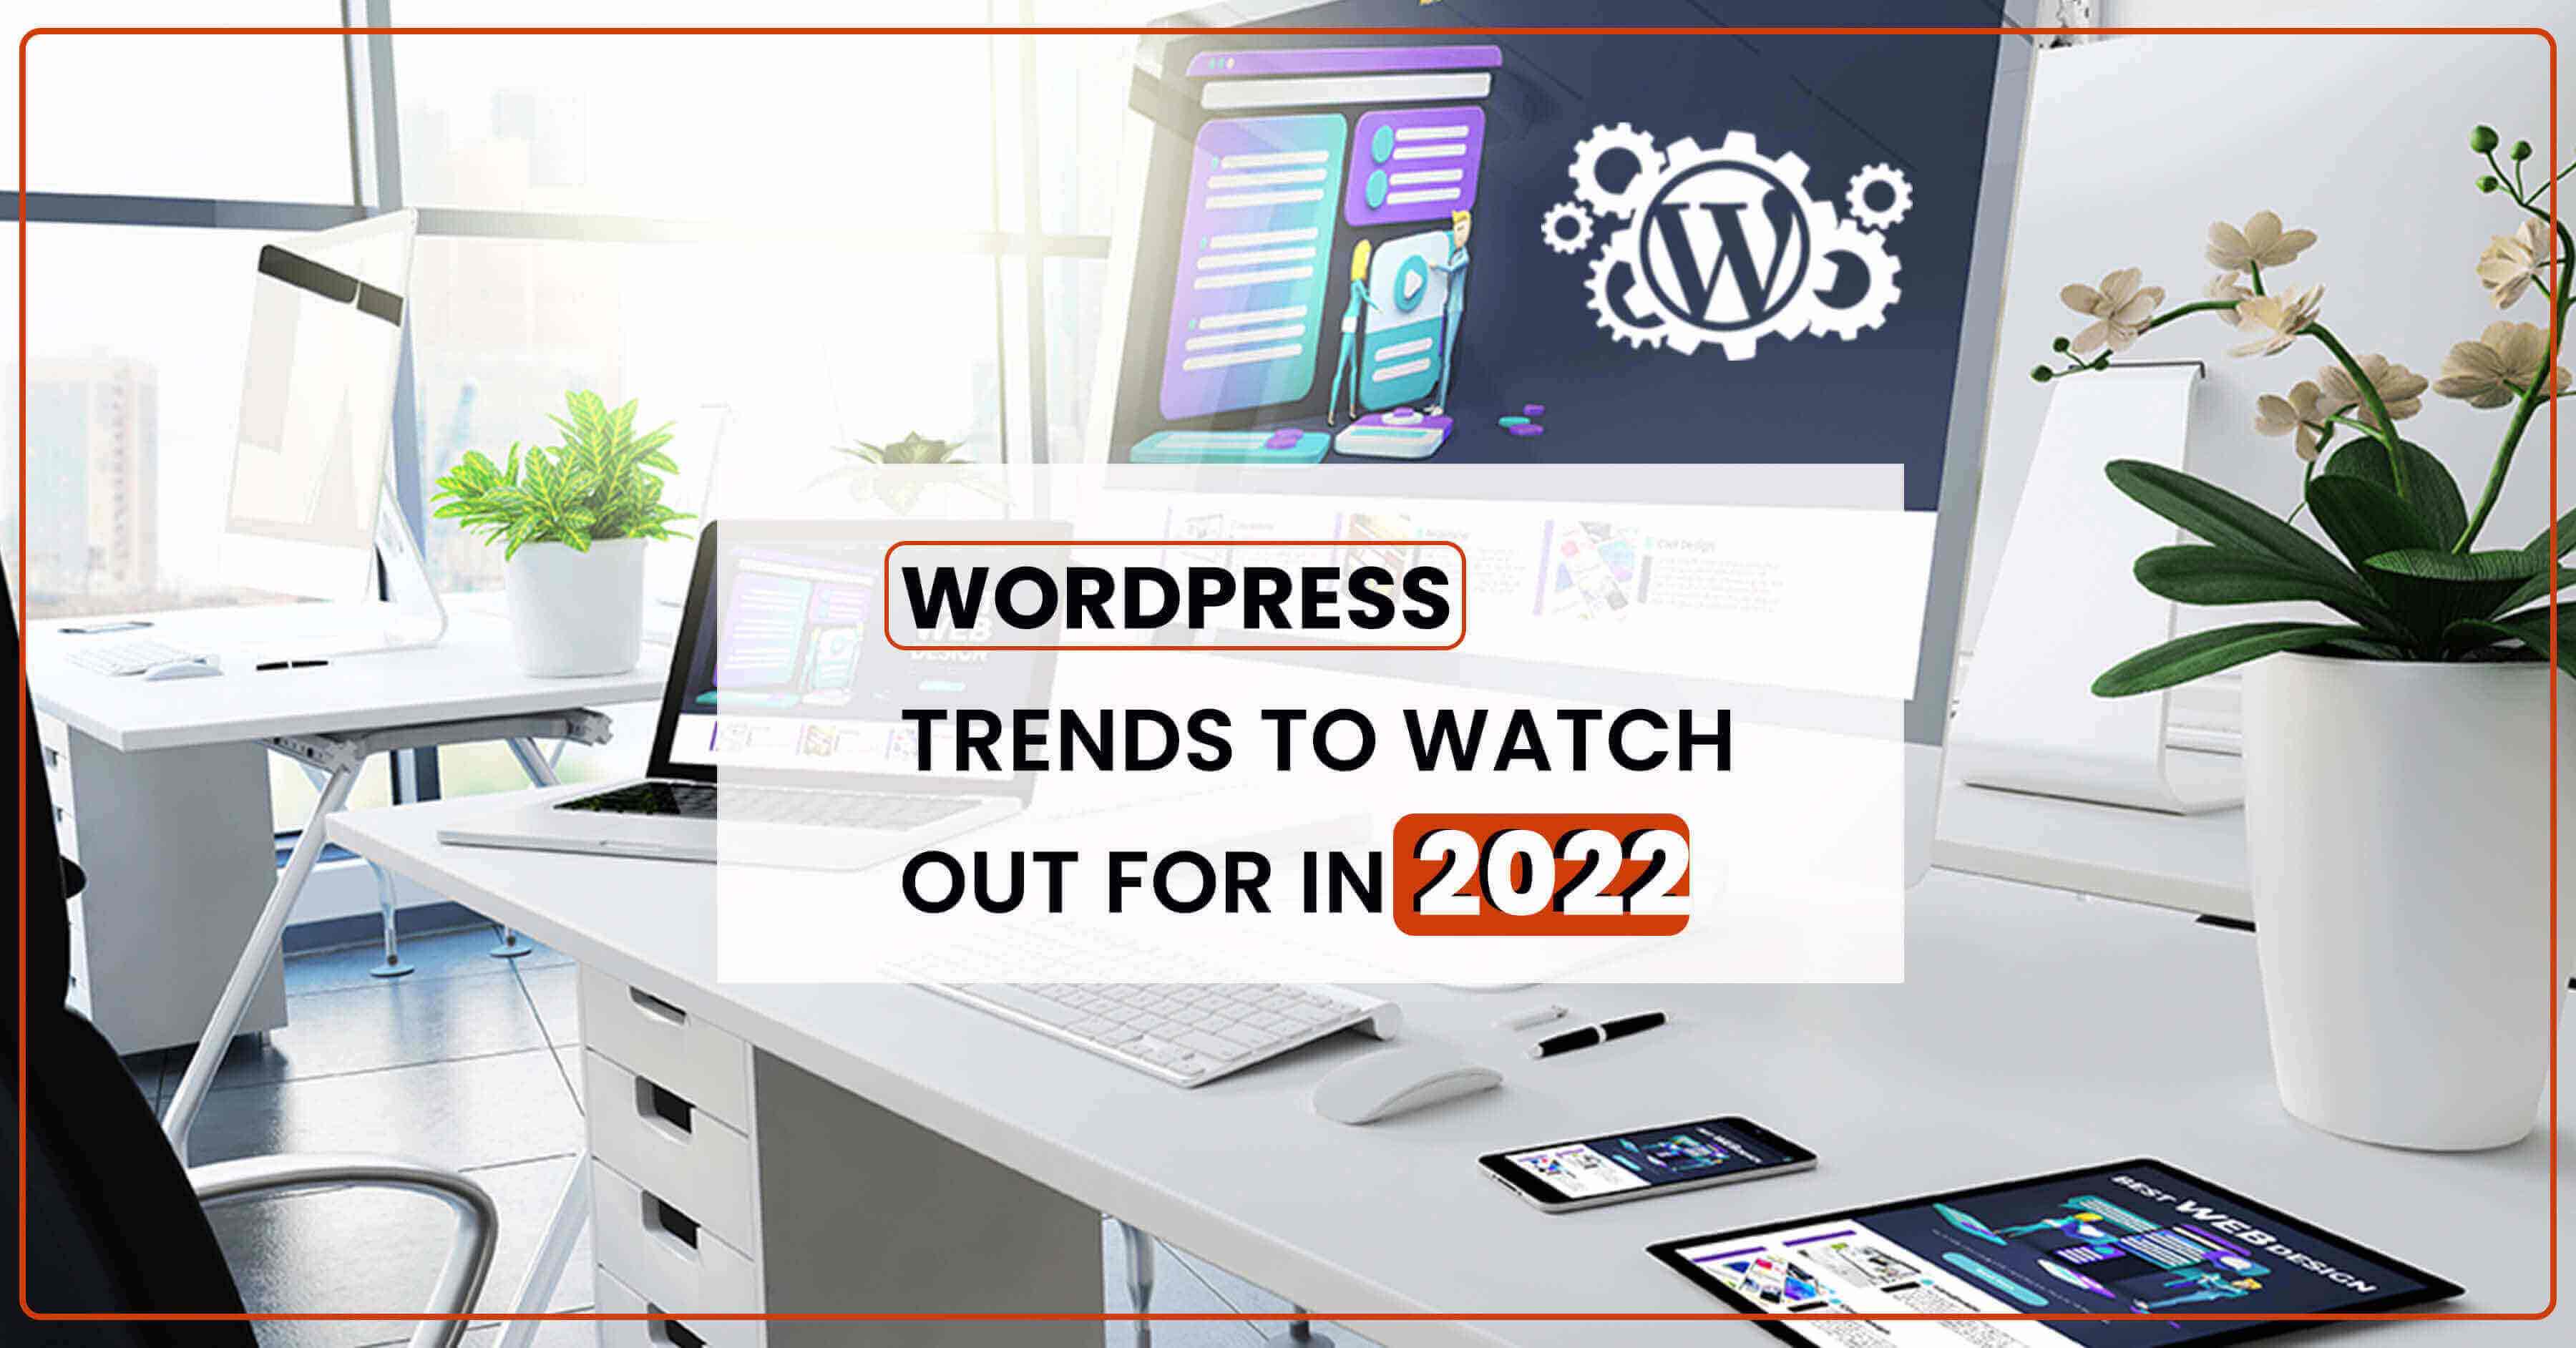 WordPress Web Development Trends To Watch Out for in 2022